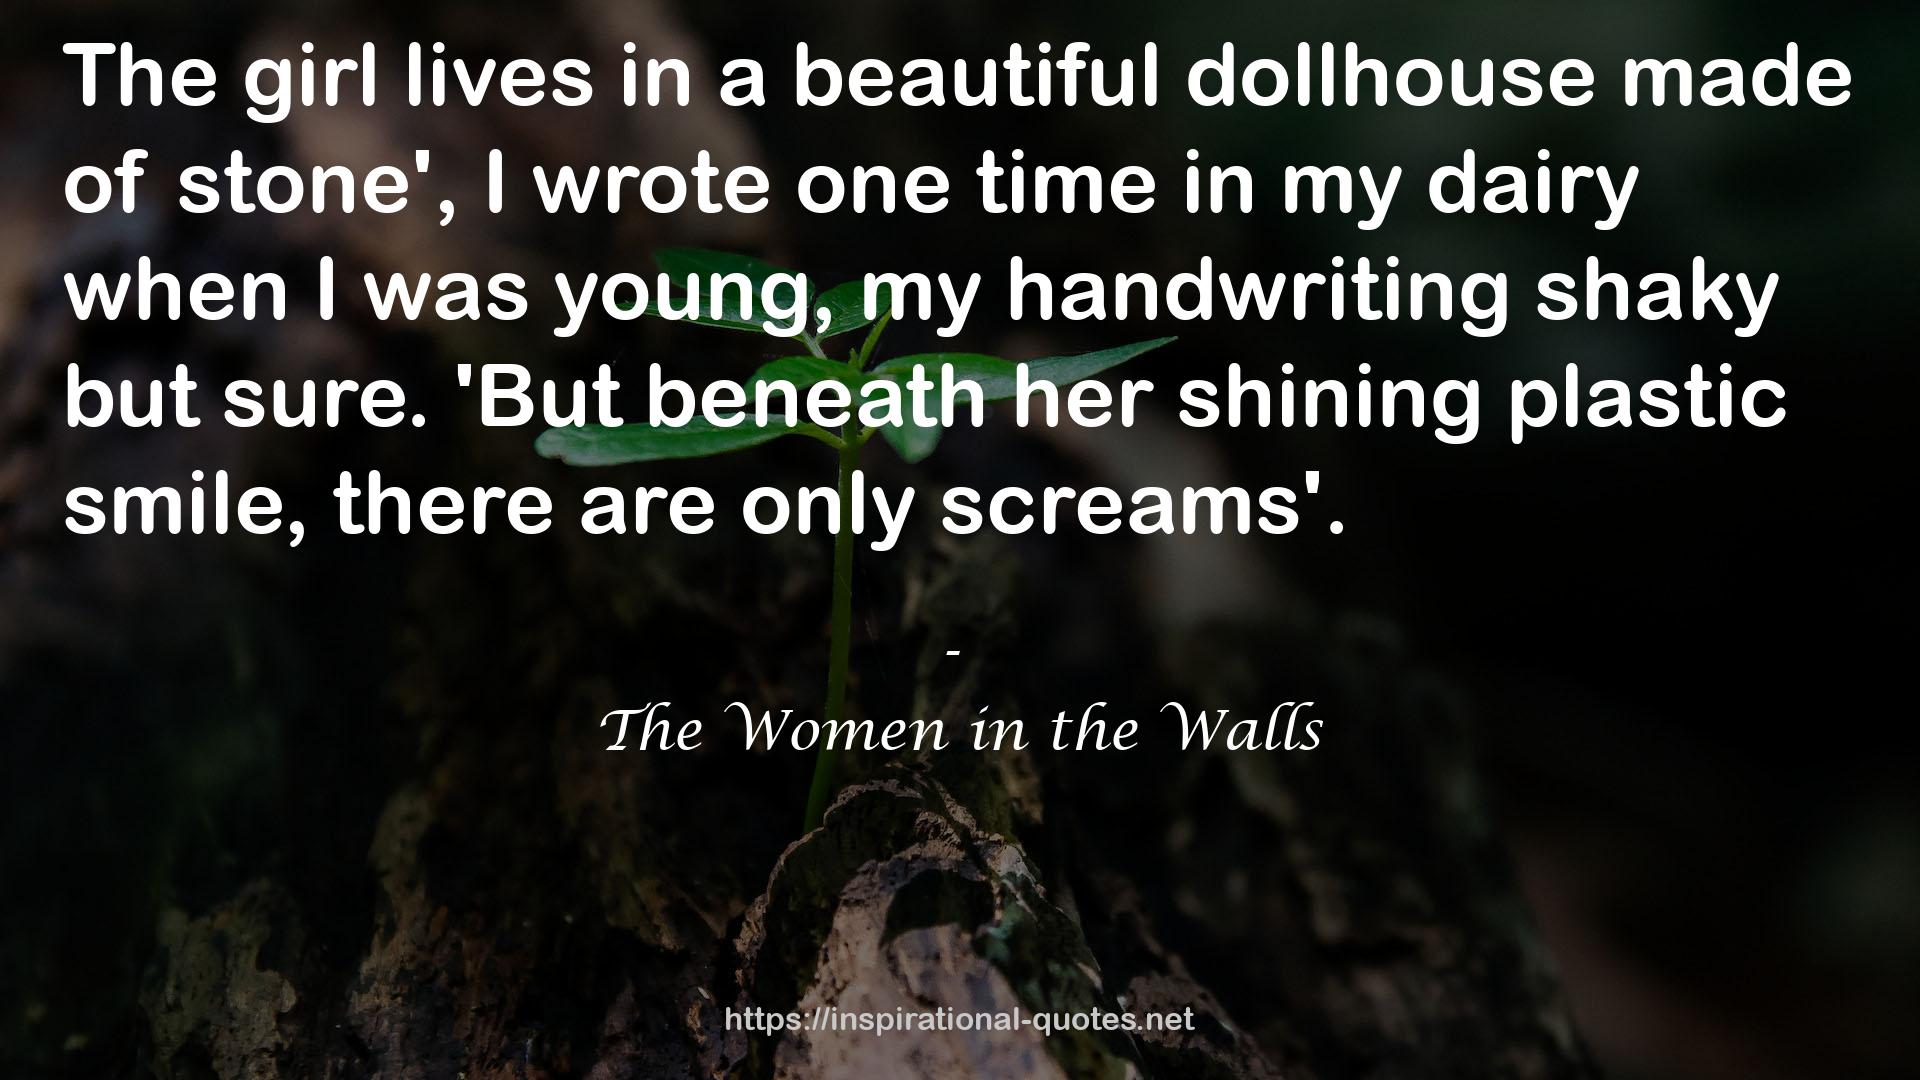 The Women in the Walls QUOTES